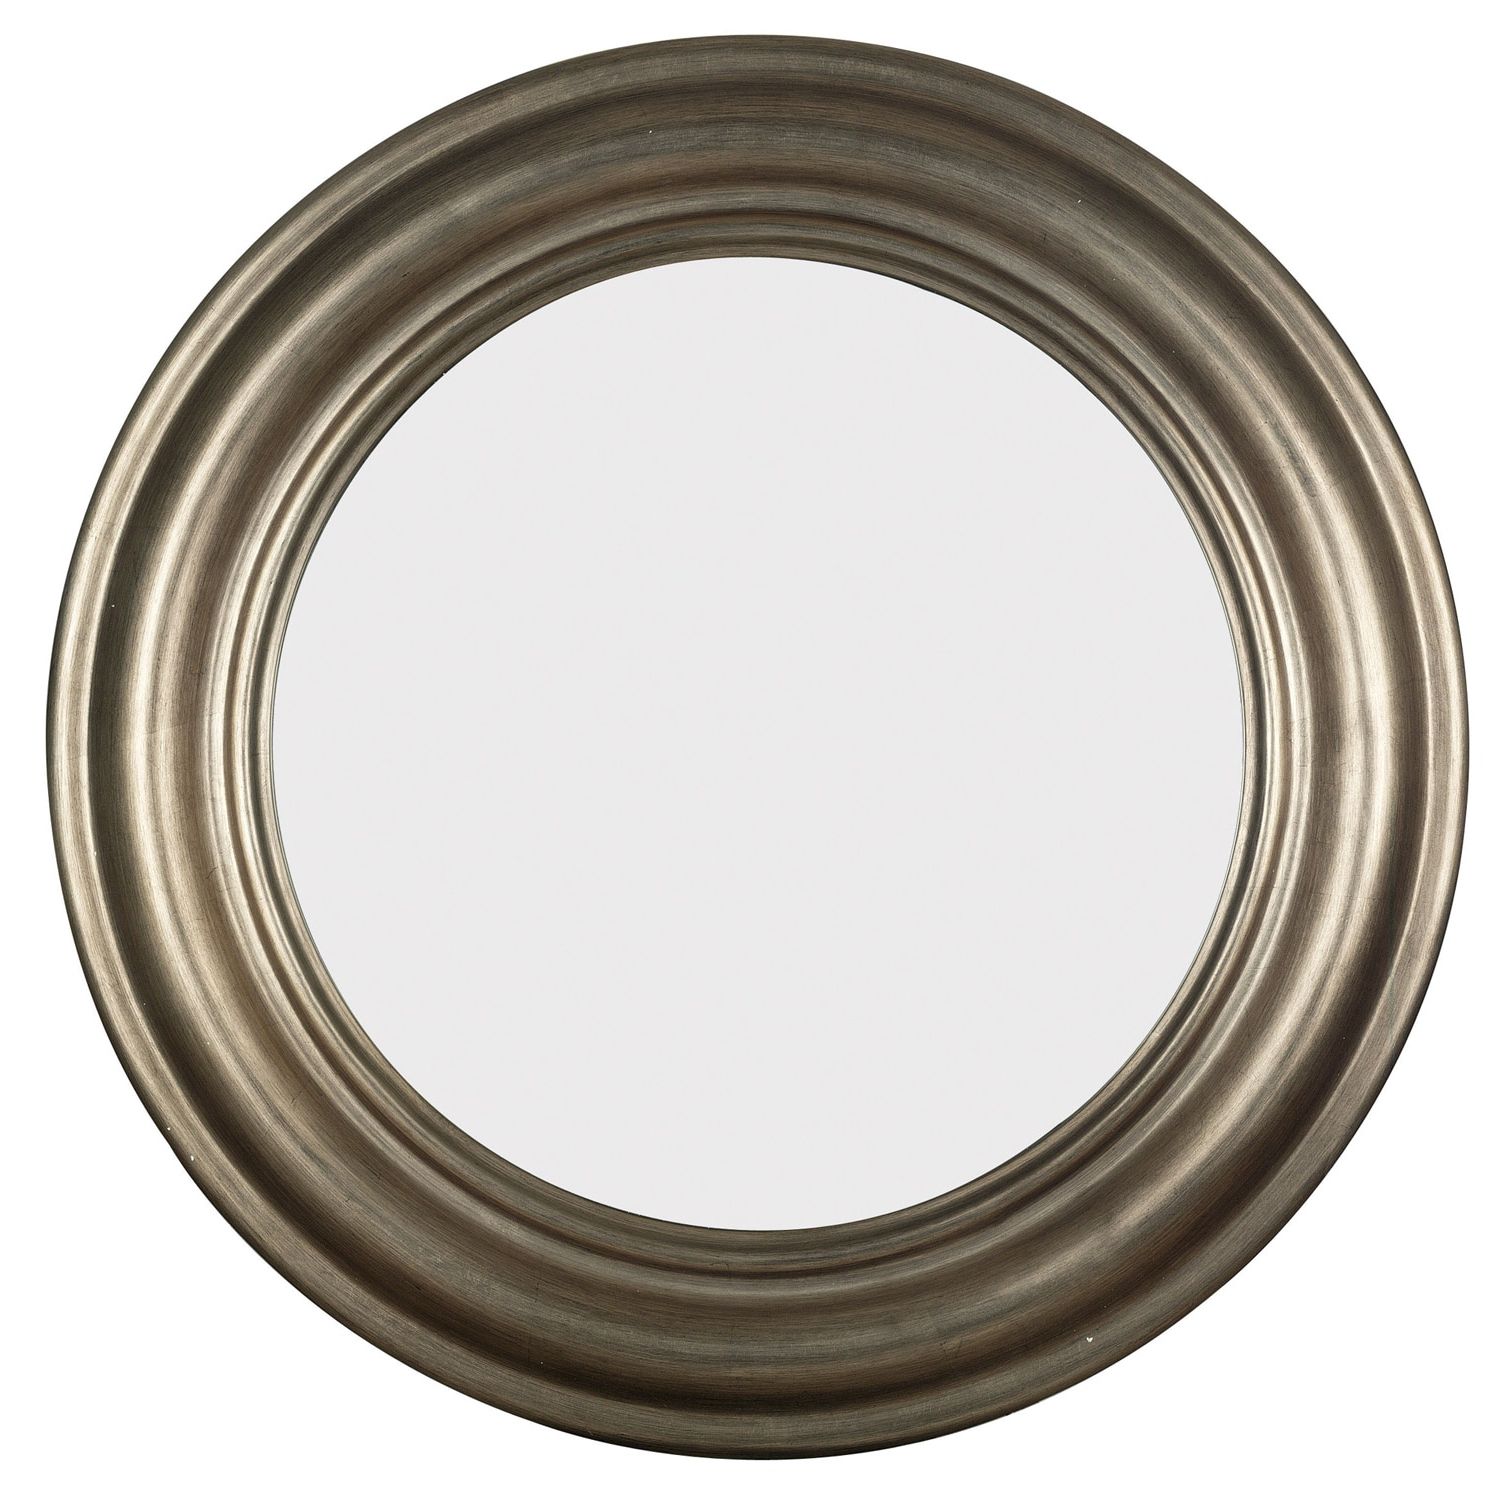 Silver Leaf Round Wall Mirrors With Regard To Favorite Pasco Round Antique Silver Wall Mirror – 13925218 – Overstock (View 13 of 15)